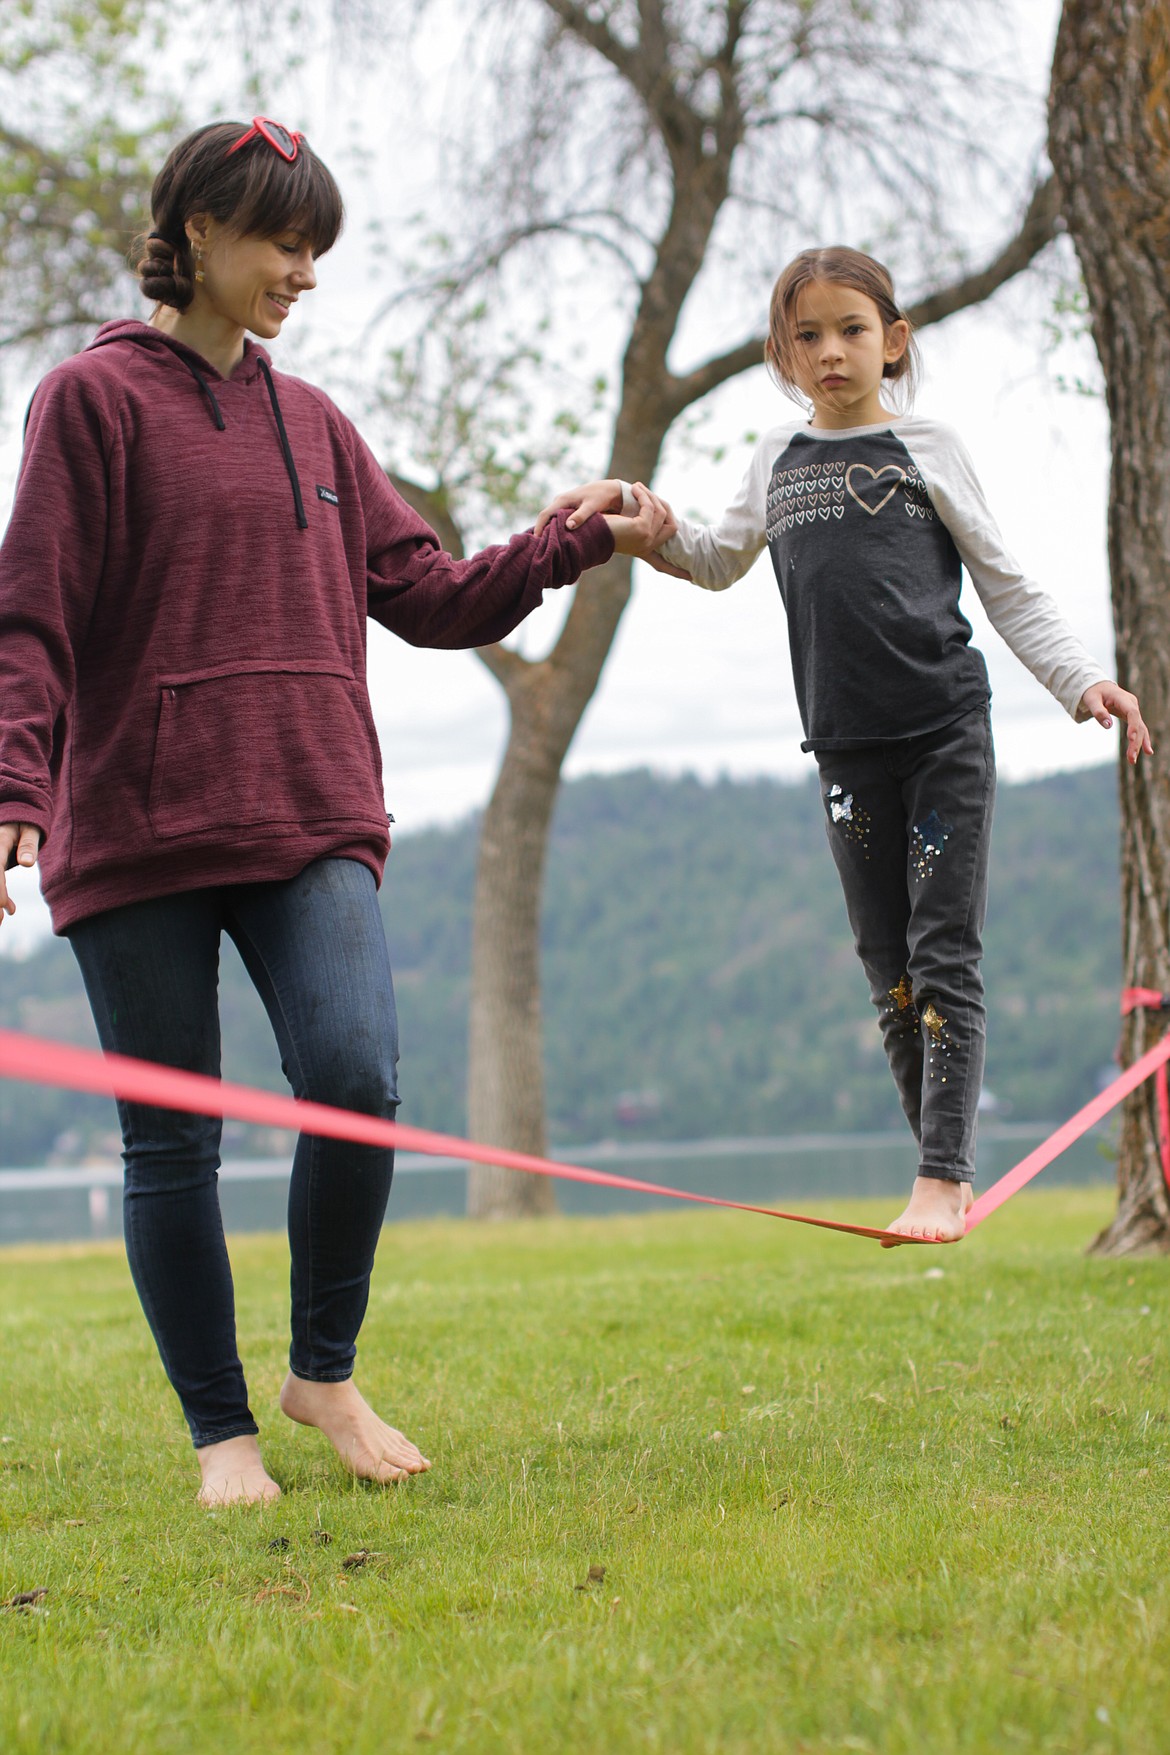 Lacey Raine Barlow helps Kiera Wilcox on a slackline at the annual Homeschool Academy party at City Beach Friday.